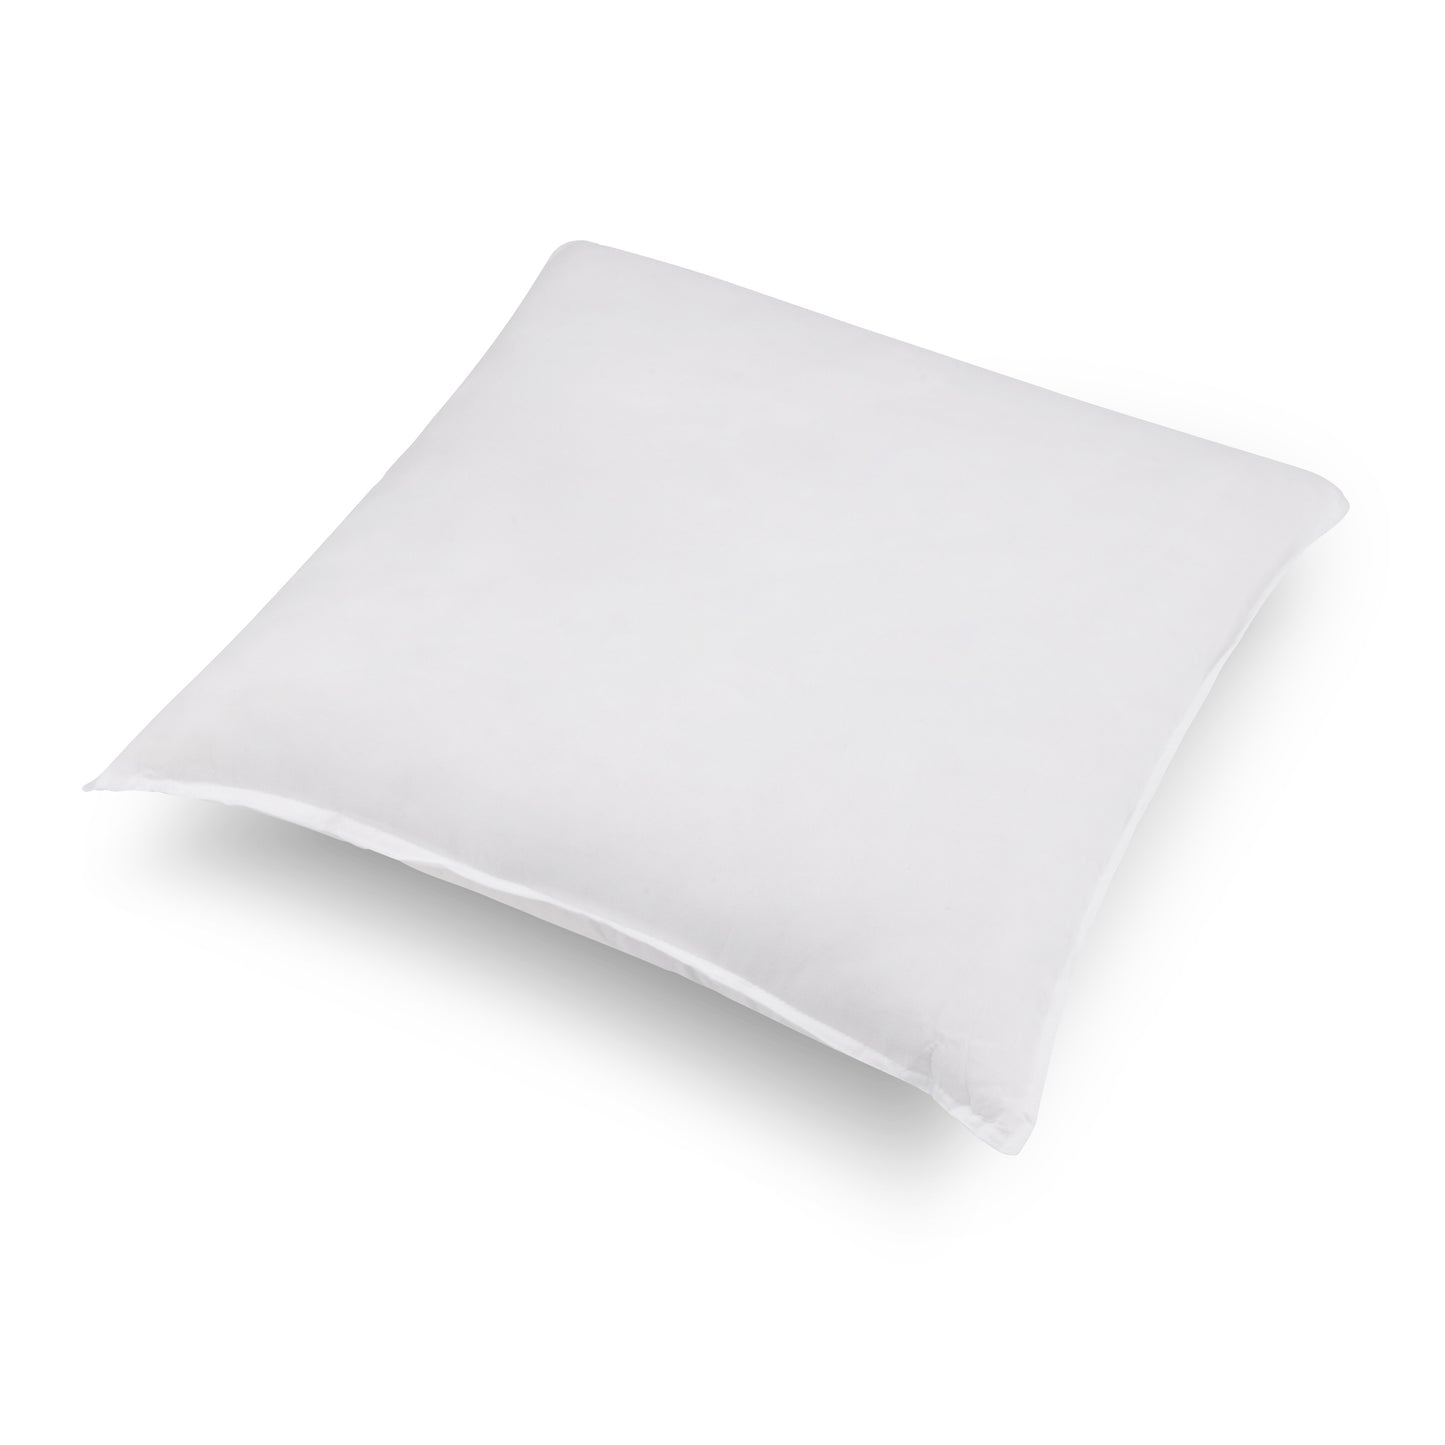 Premium Cushion inserts - 100GSM Microfibre Covers and 7D Hollowfibre Fillings - 2 Pack